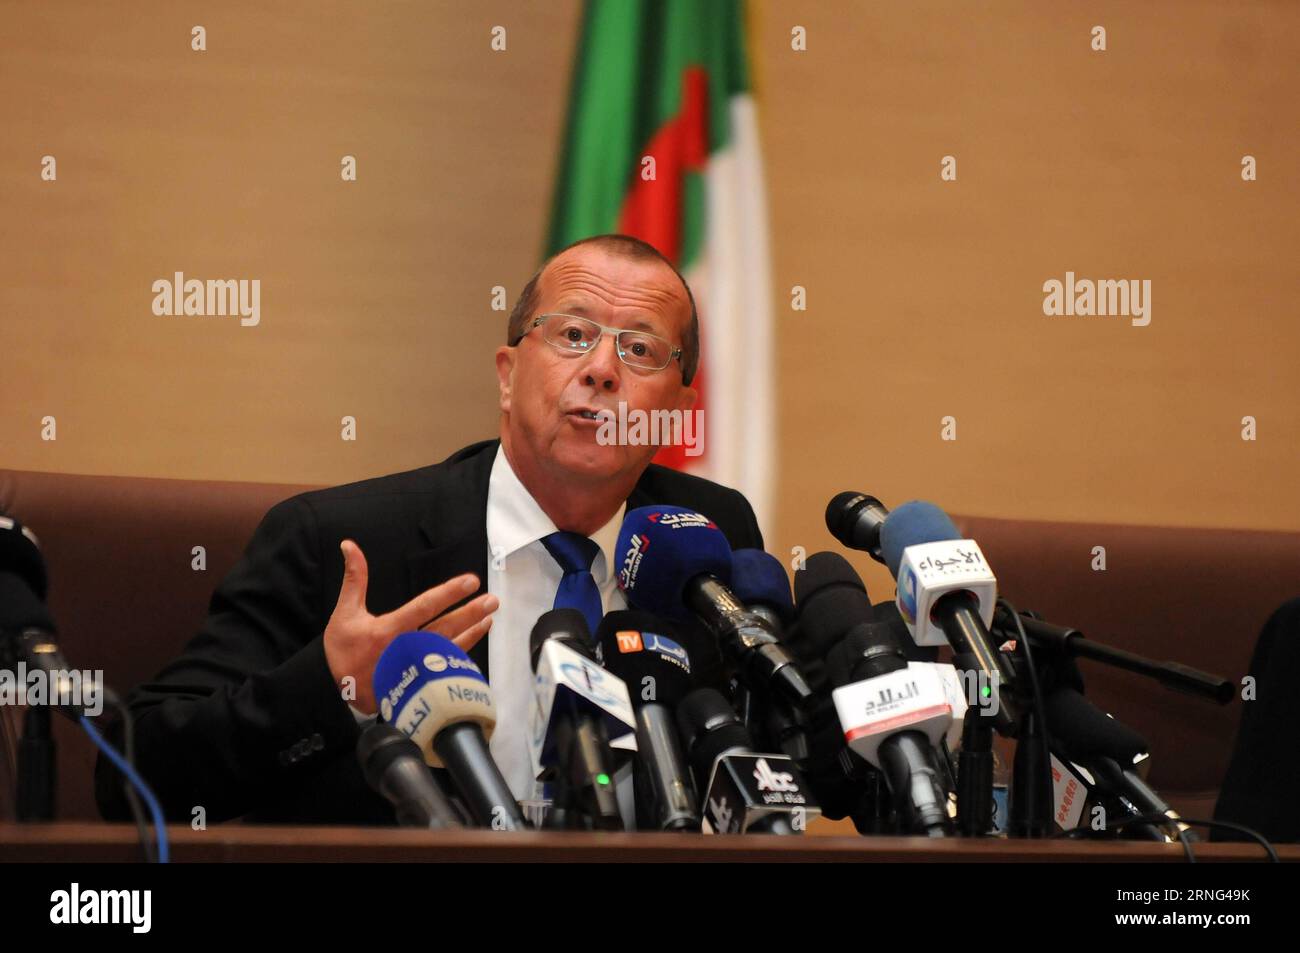 (160904) -- ALGIERS, Sept. 4, 2016 () -- UN Special Envoy for Libya Martin Kobler speaks at a press conference in Algiers, capital of Algeria, on Sept. 4, 2016. Visiting UN Special Envoy for Libya Martin Kobler and Algerian Minister for Maghreb Affairs, the African Union and the Arab League Abdelkader Messahel held a joint press conference in Algiers. () (syq) ALGERIA-ALGIERS-UN-KOBLER-VISIT Xinhua PUBLICATIONxNOTxINxCHN   160904 Algiers Sept 4 2016 UN Special Envoy for Libya Martin Kobler Speaks AT a Press Conference in Algiers Capital of Algeria ON Sept 4 2016 Visiting UN Special Envoy for L Stock Photo